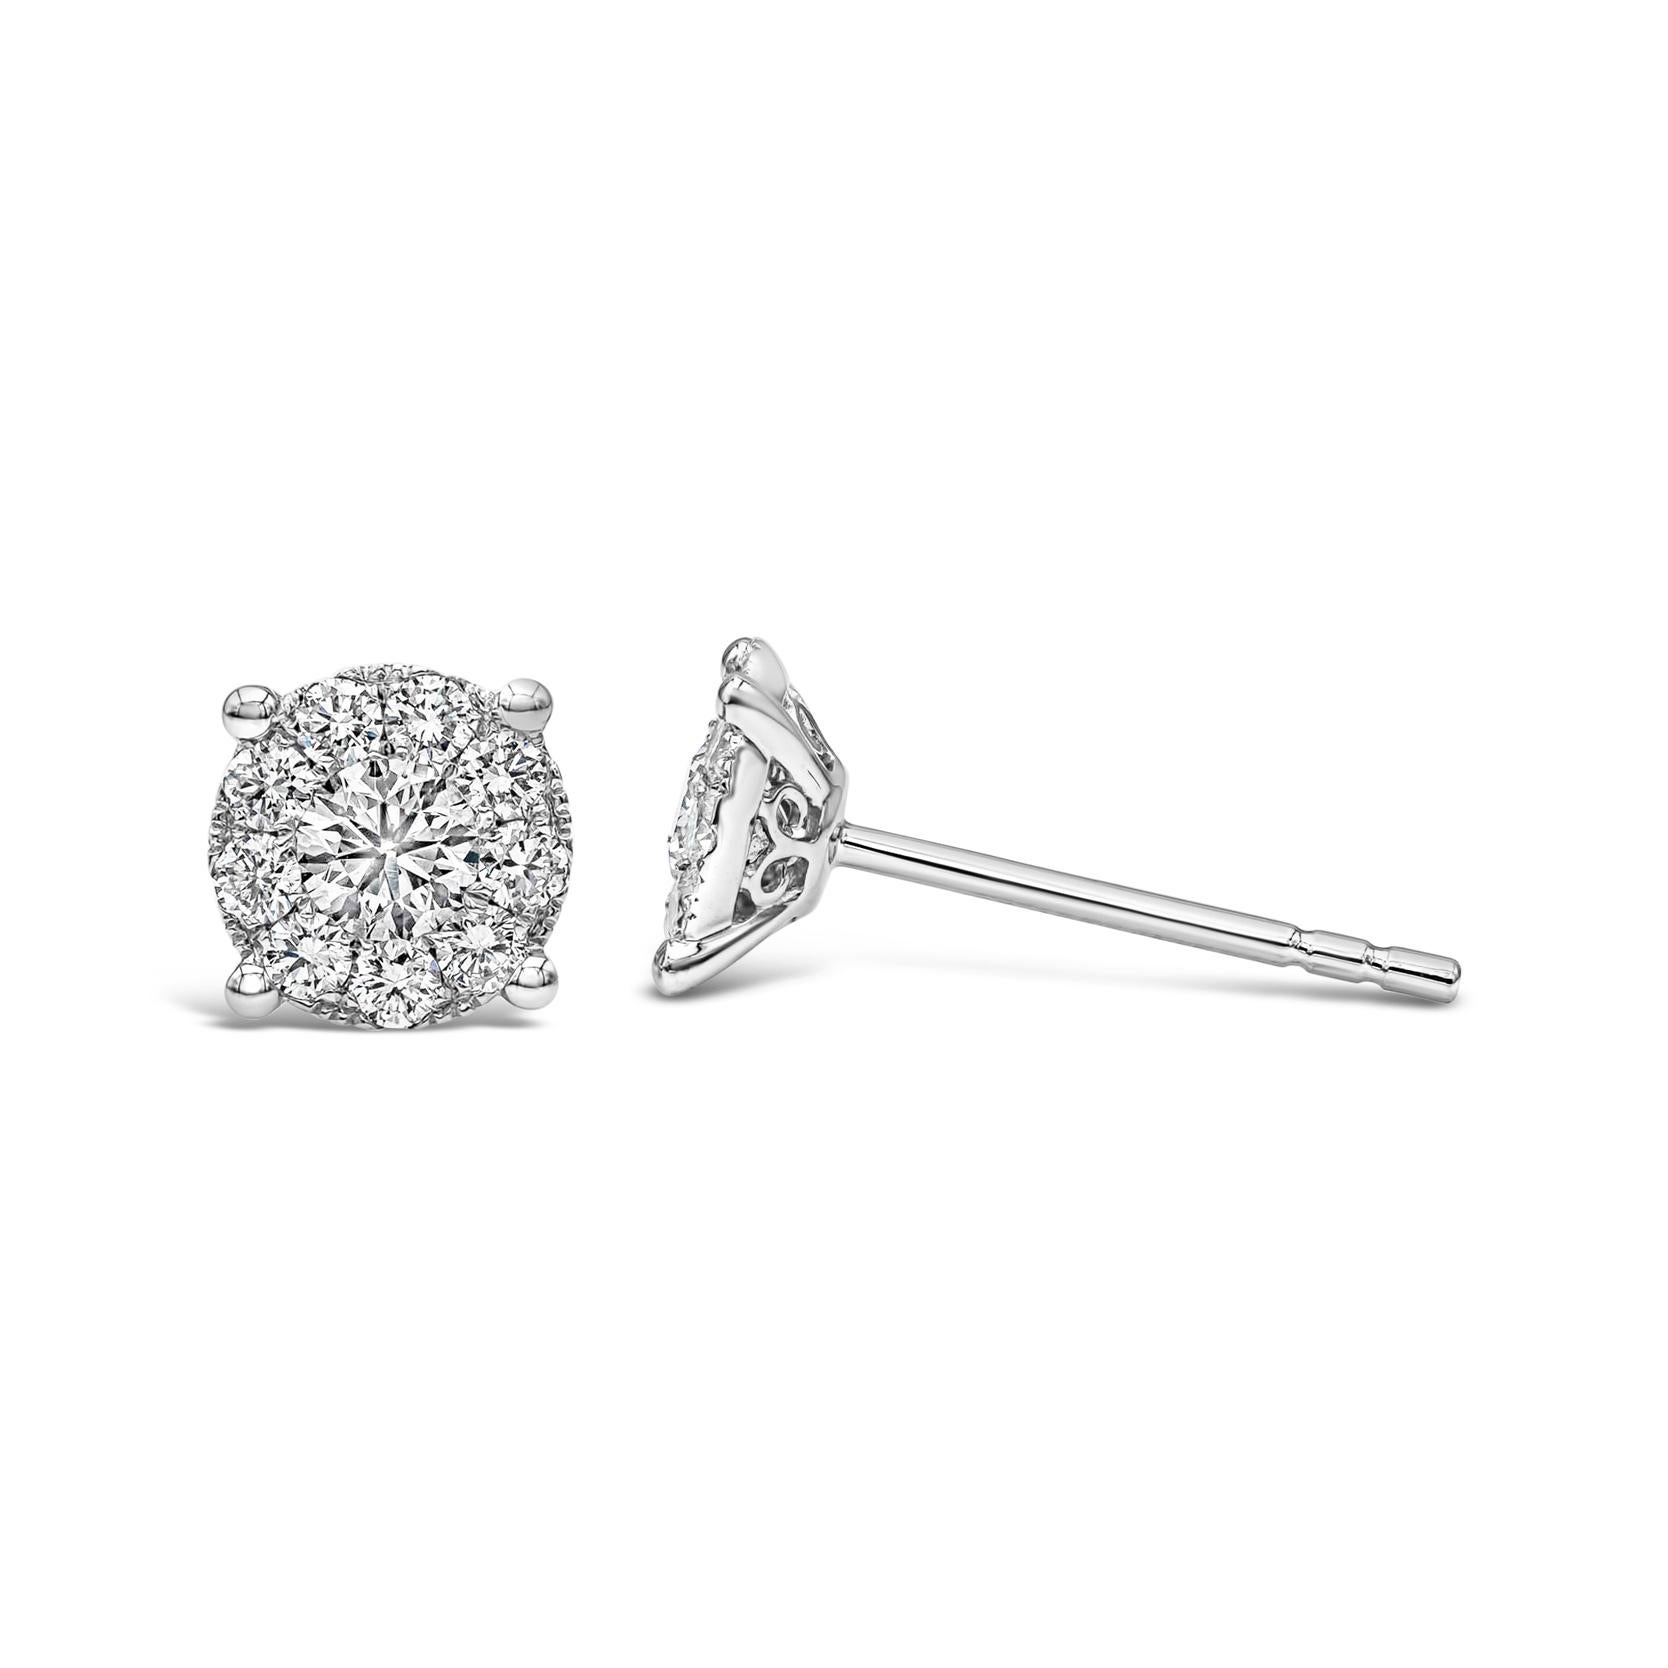 A classic pair of stud earrings showcasing a cluster of round brilliant diamonds weighing 0.76 carats total, G Color and VS in Clarity. The earrings exude the look of a one carat each diamond stud earrings. Made with 18K White Gold.

Style available